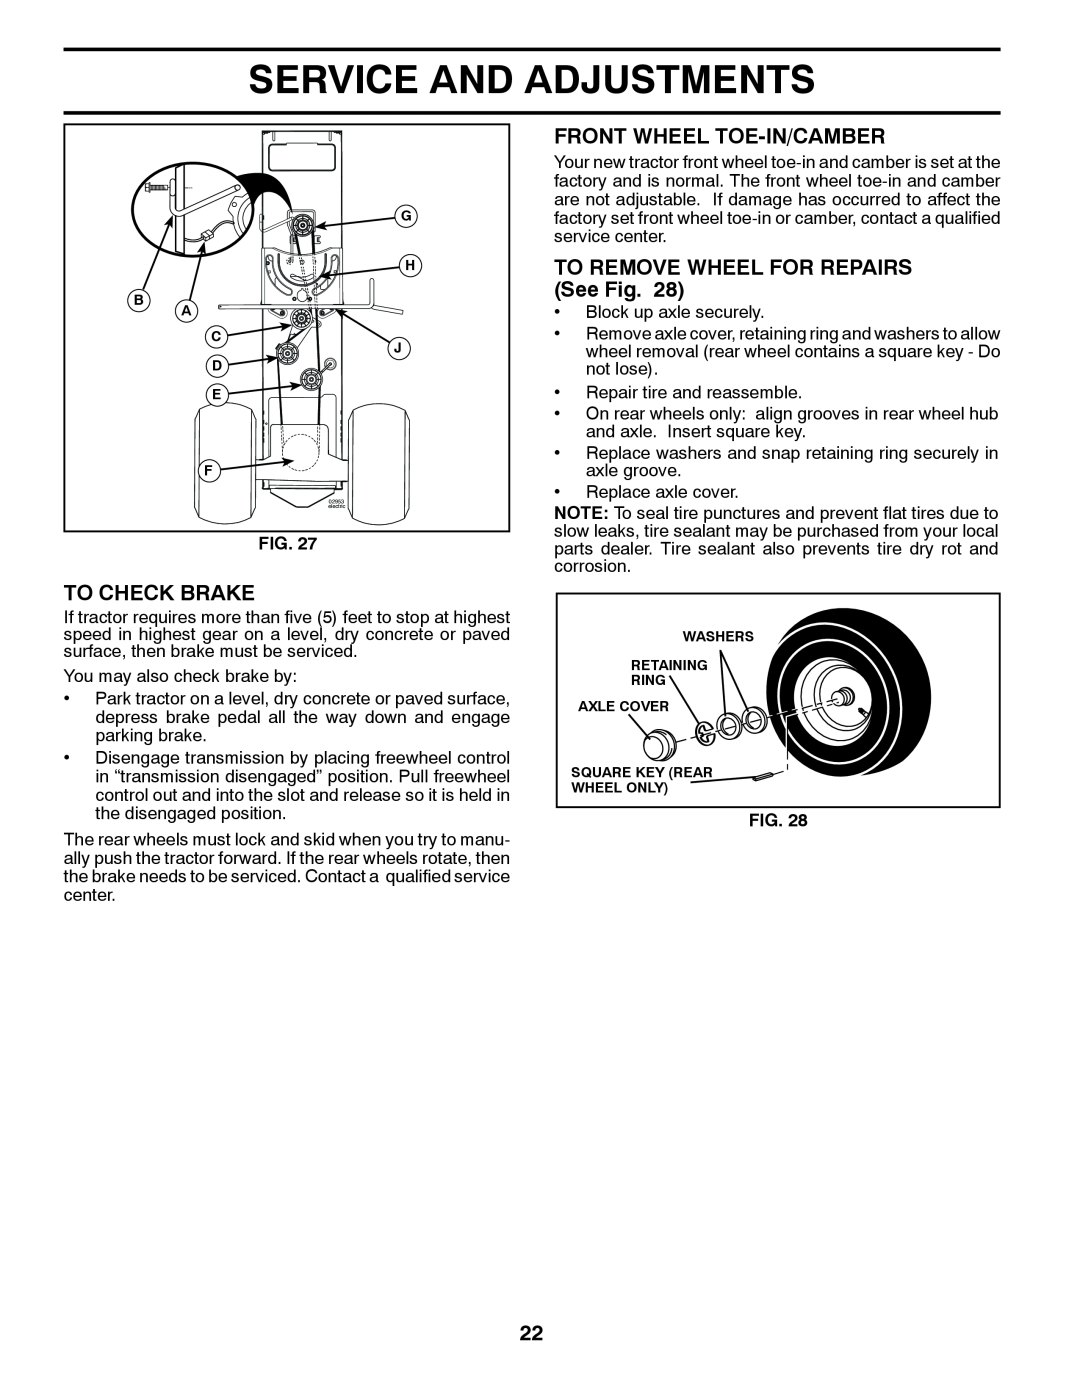 Husqvarna YTH2146XP owner manual Front Wheel Toe-In/Camber, TO REMOVE WHEEL FOR REPAIRS See Fig, To Check Brake, electric 